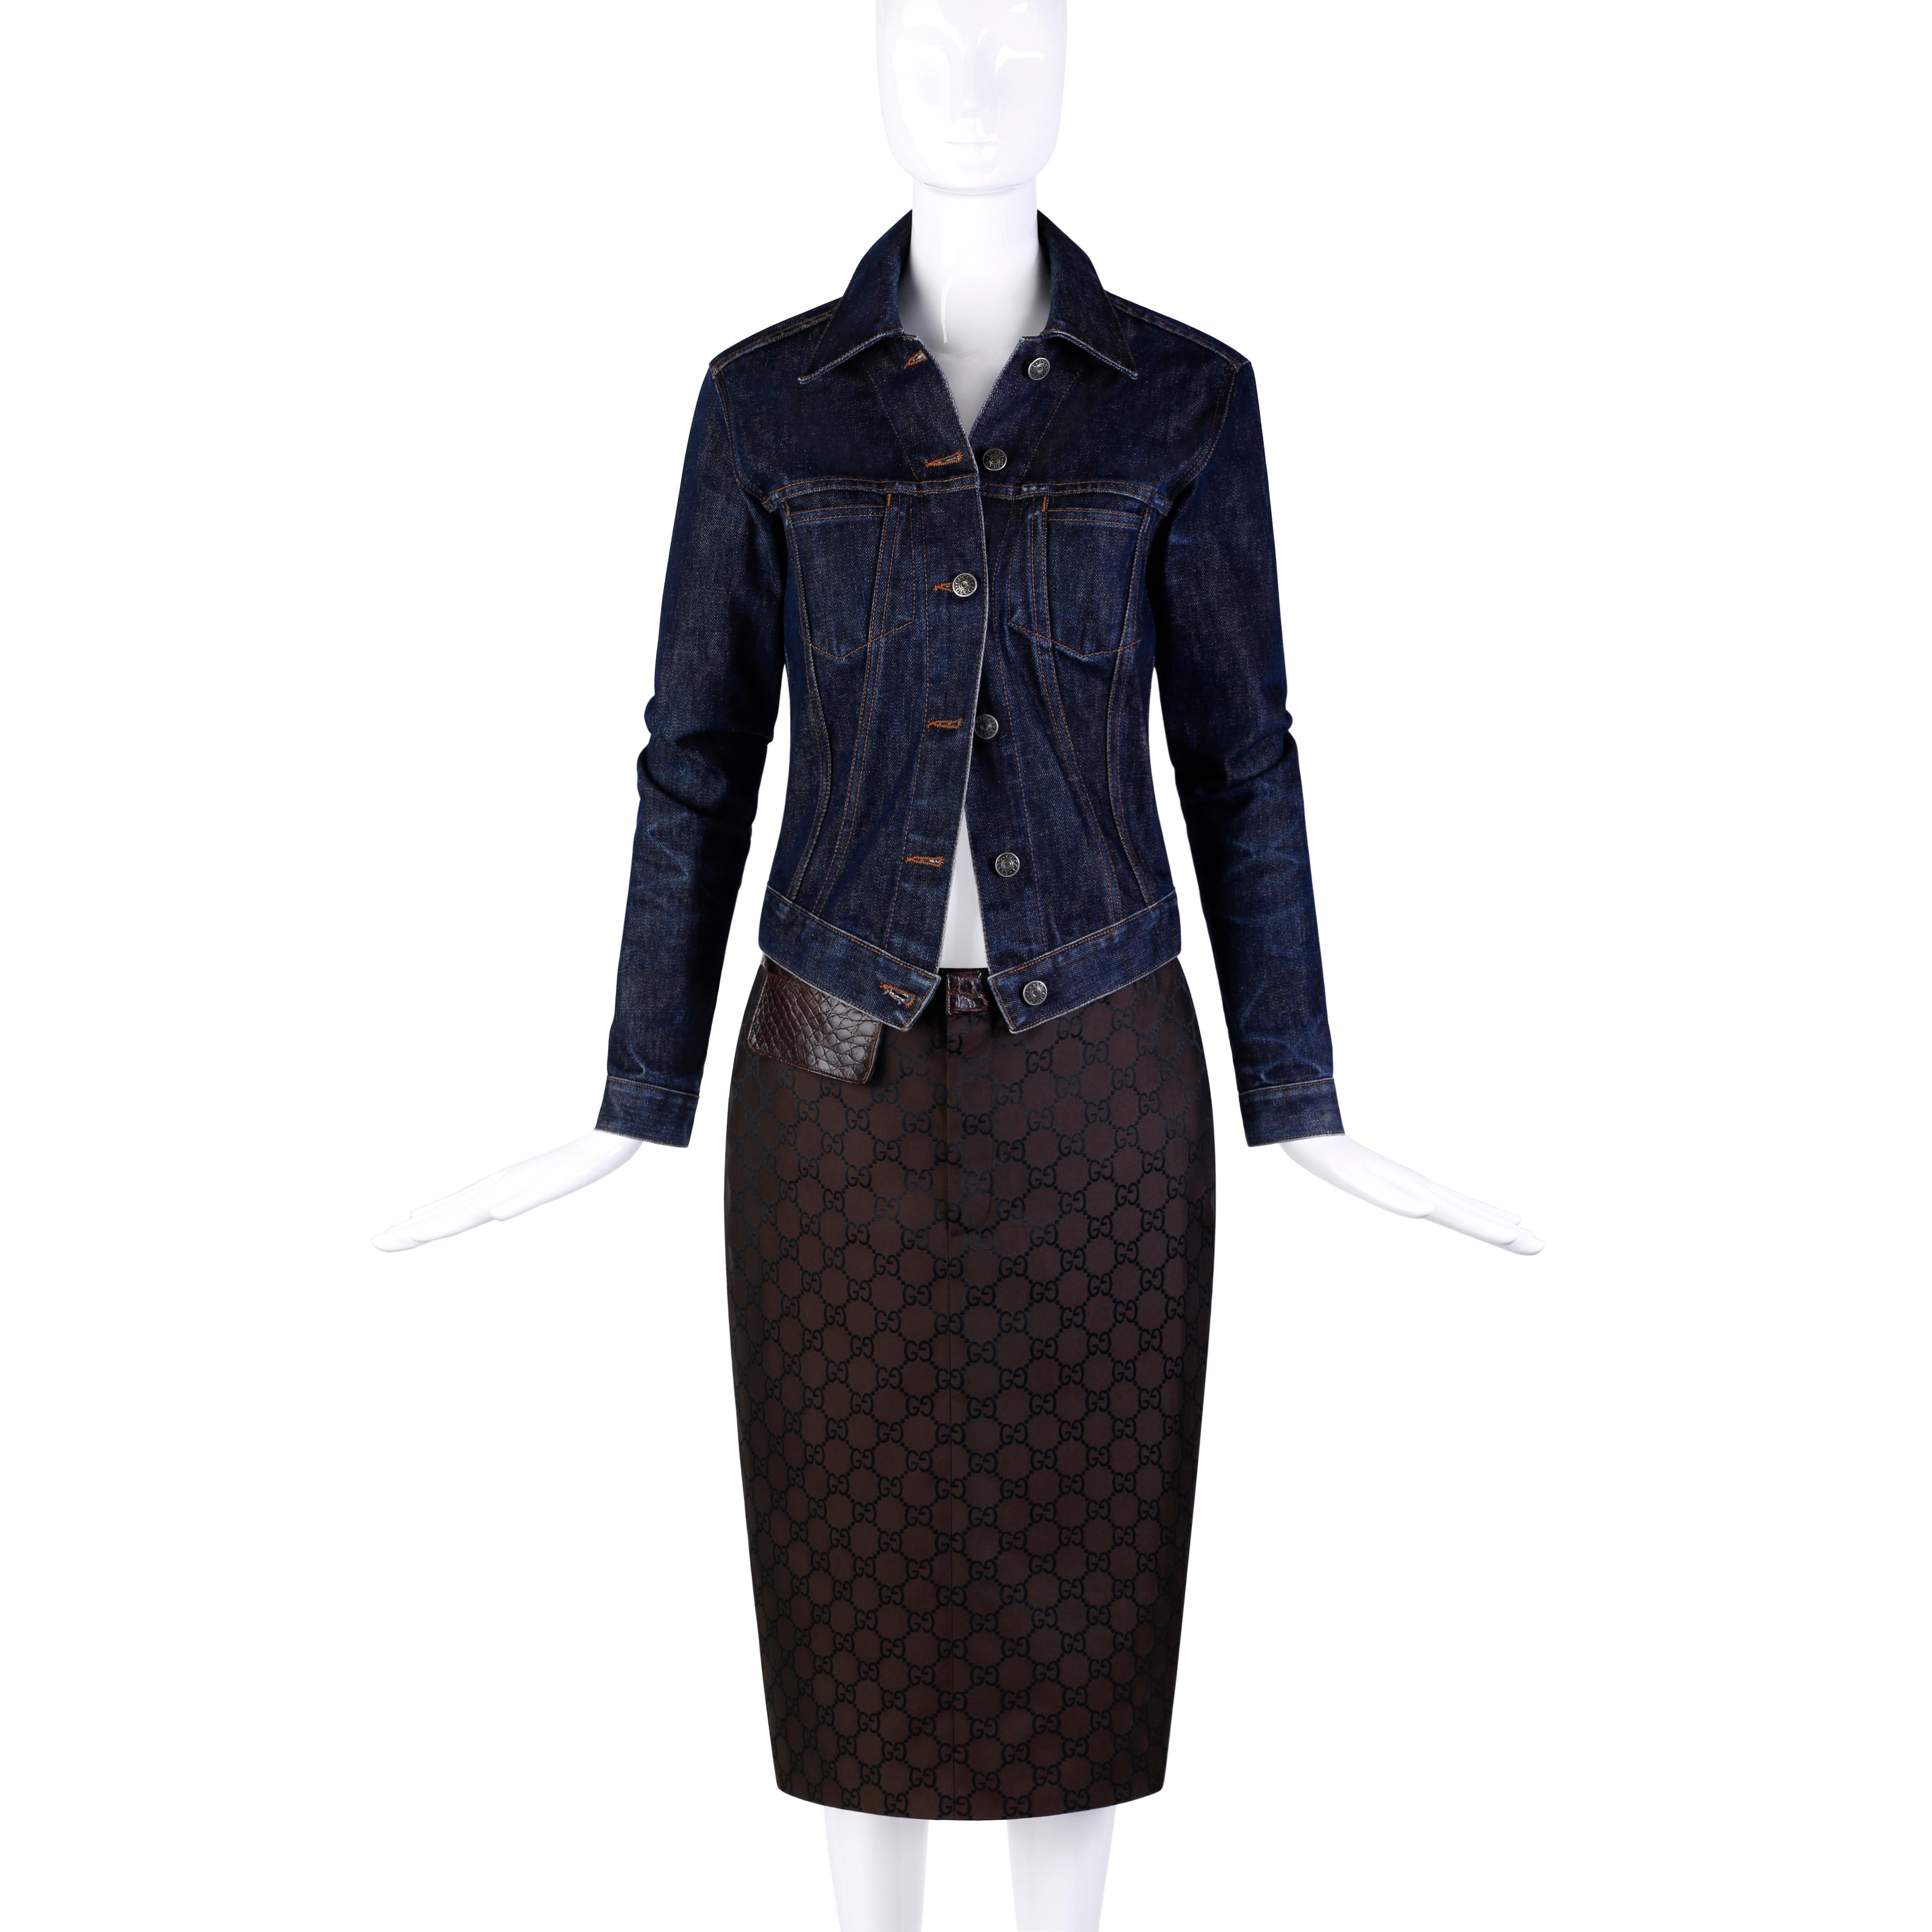 Designed by Tom Ford for the Gucci Spring/Summer 1998 collection. Skirt features a jacquard Guccissima print throughout. Skirt is accented with genuine alligator leather along waistband 
and a single flap pocket accent at right hip. Denim jacket